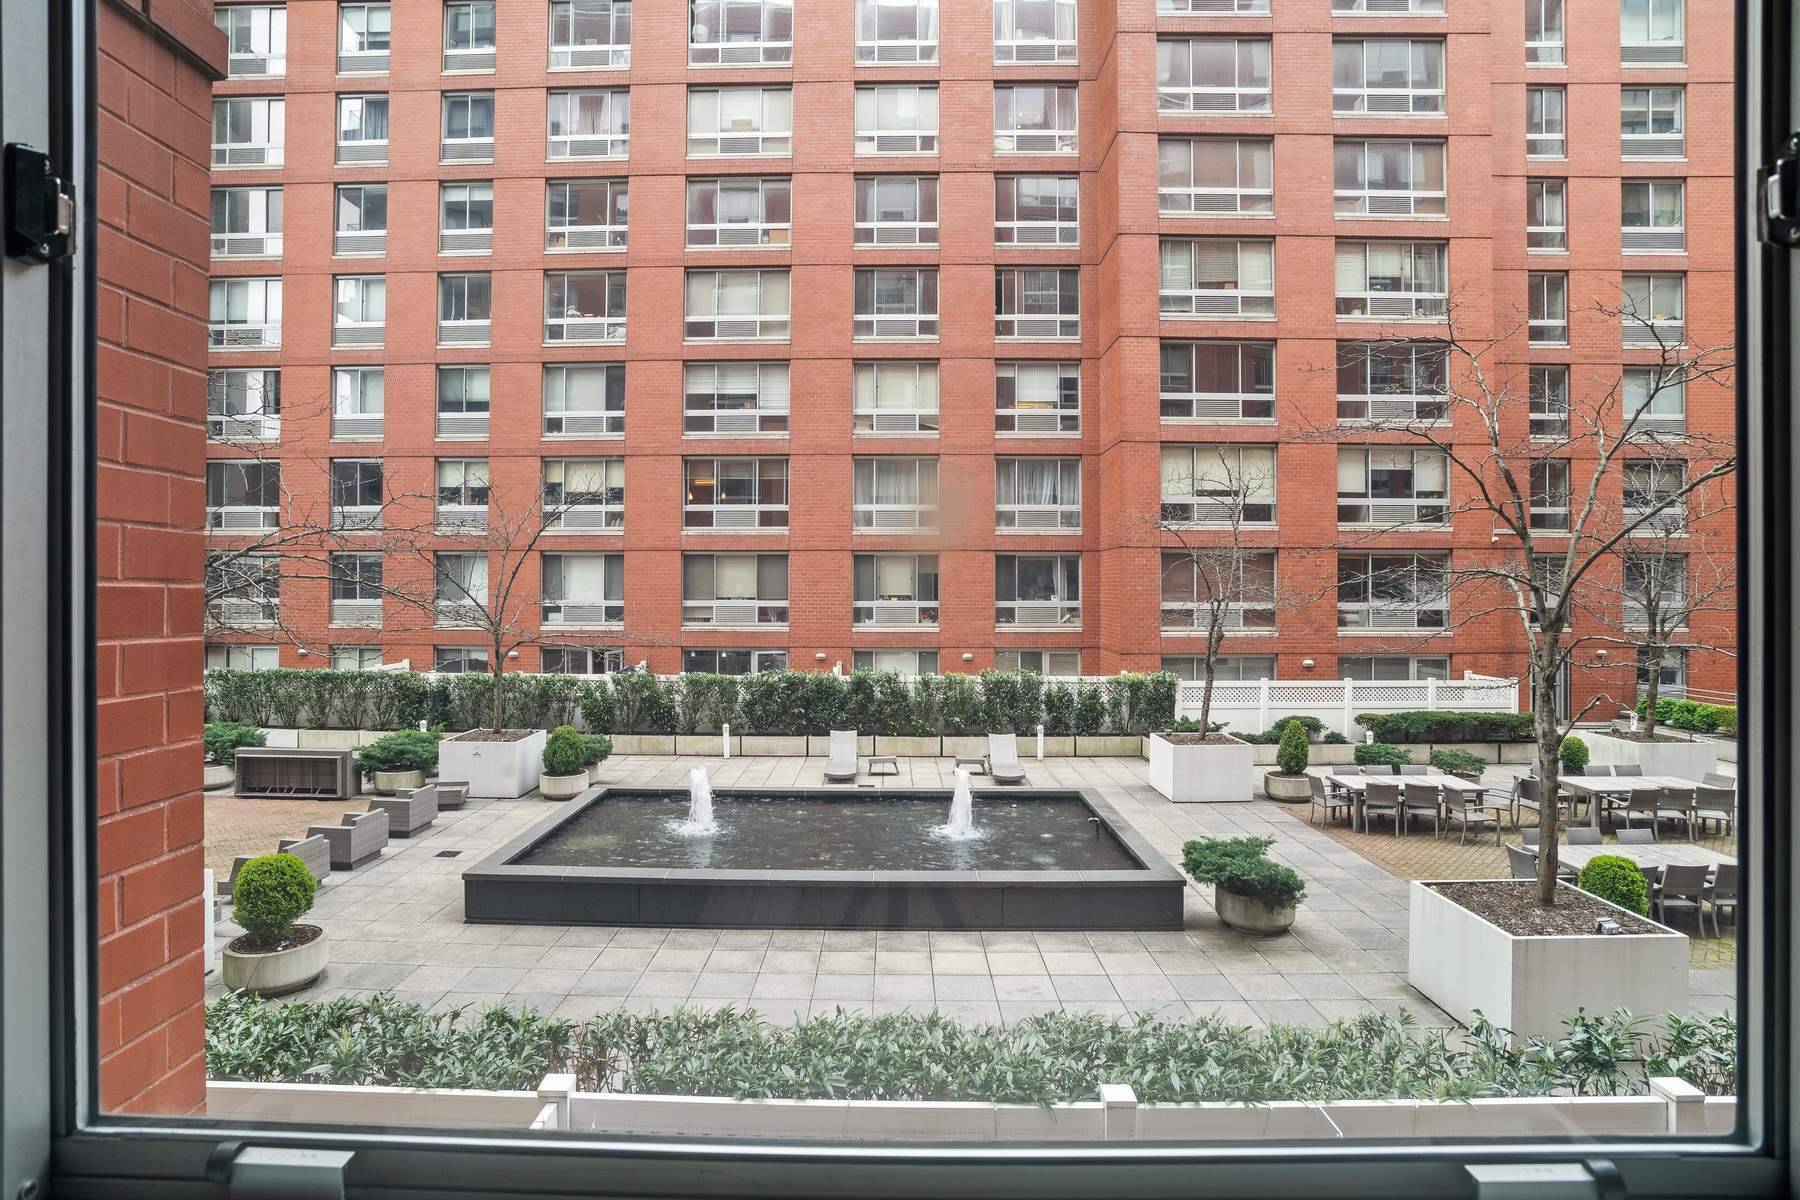 Picture perfect views of the building s private landscaped courtyard and fountain welcome you into this well appointed 1 bedroom condo in prime West Chelsea.